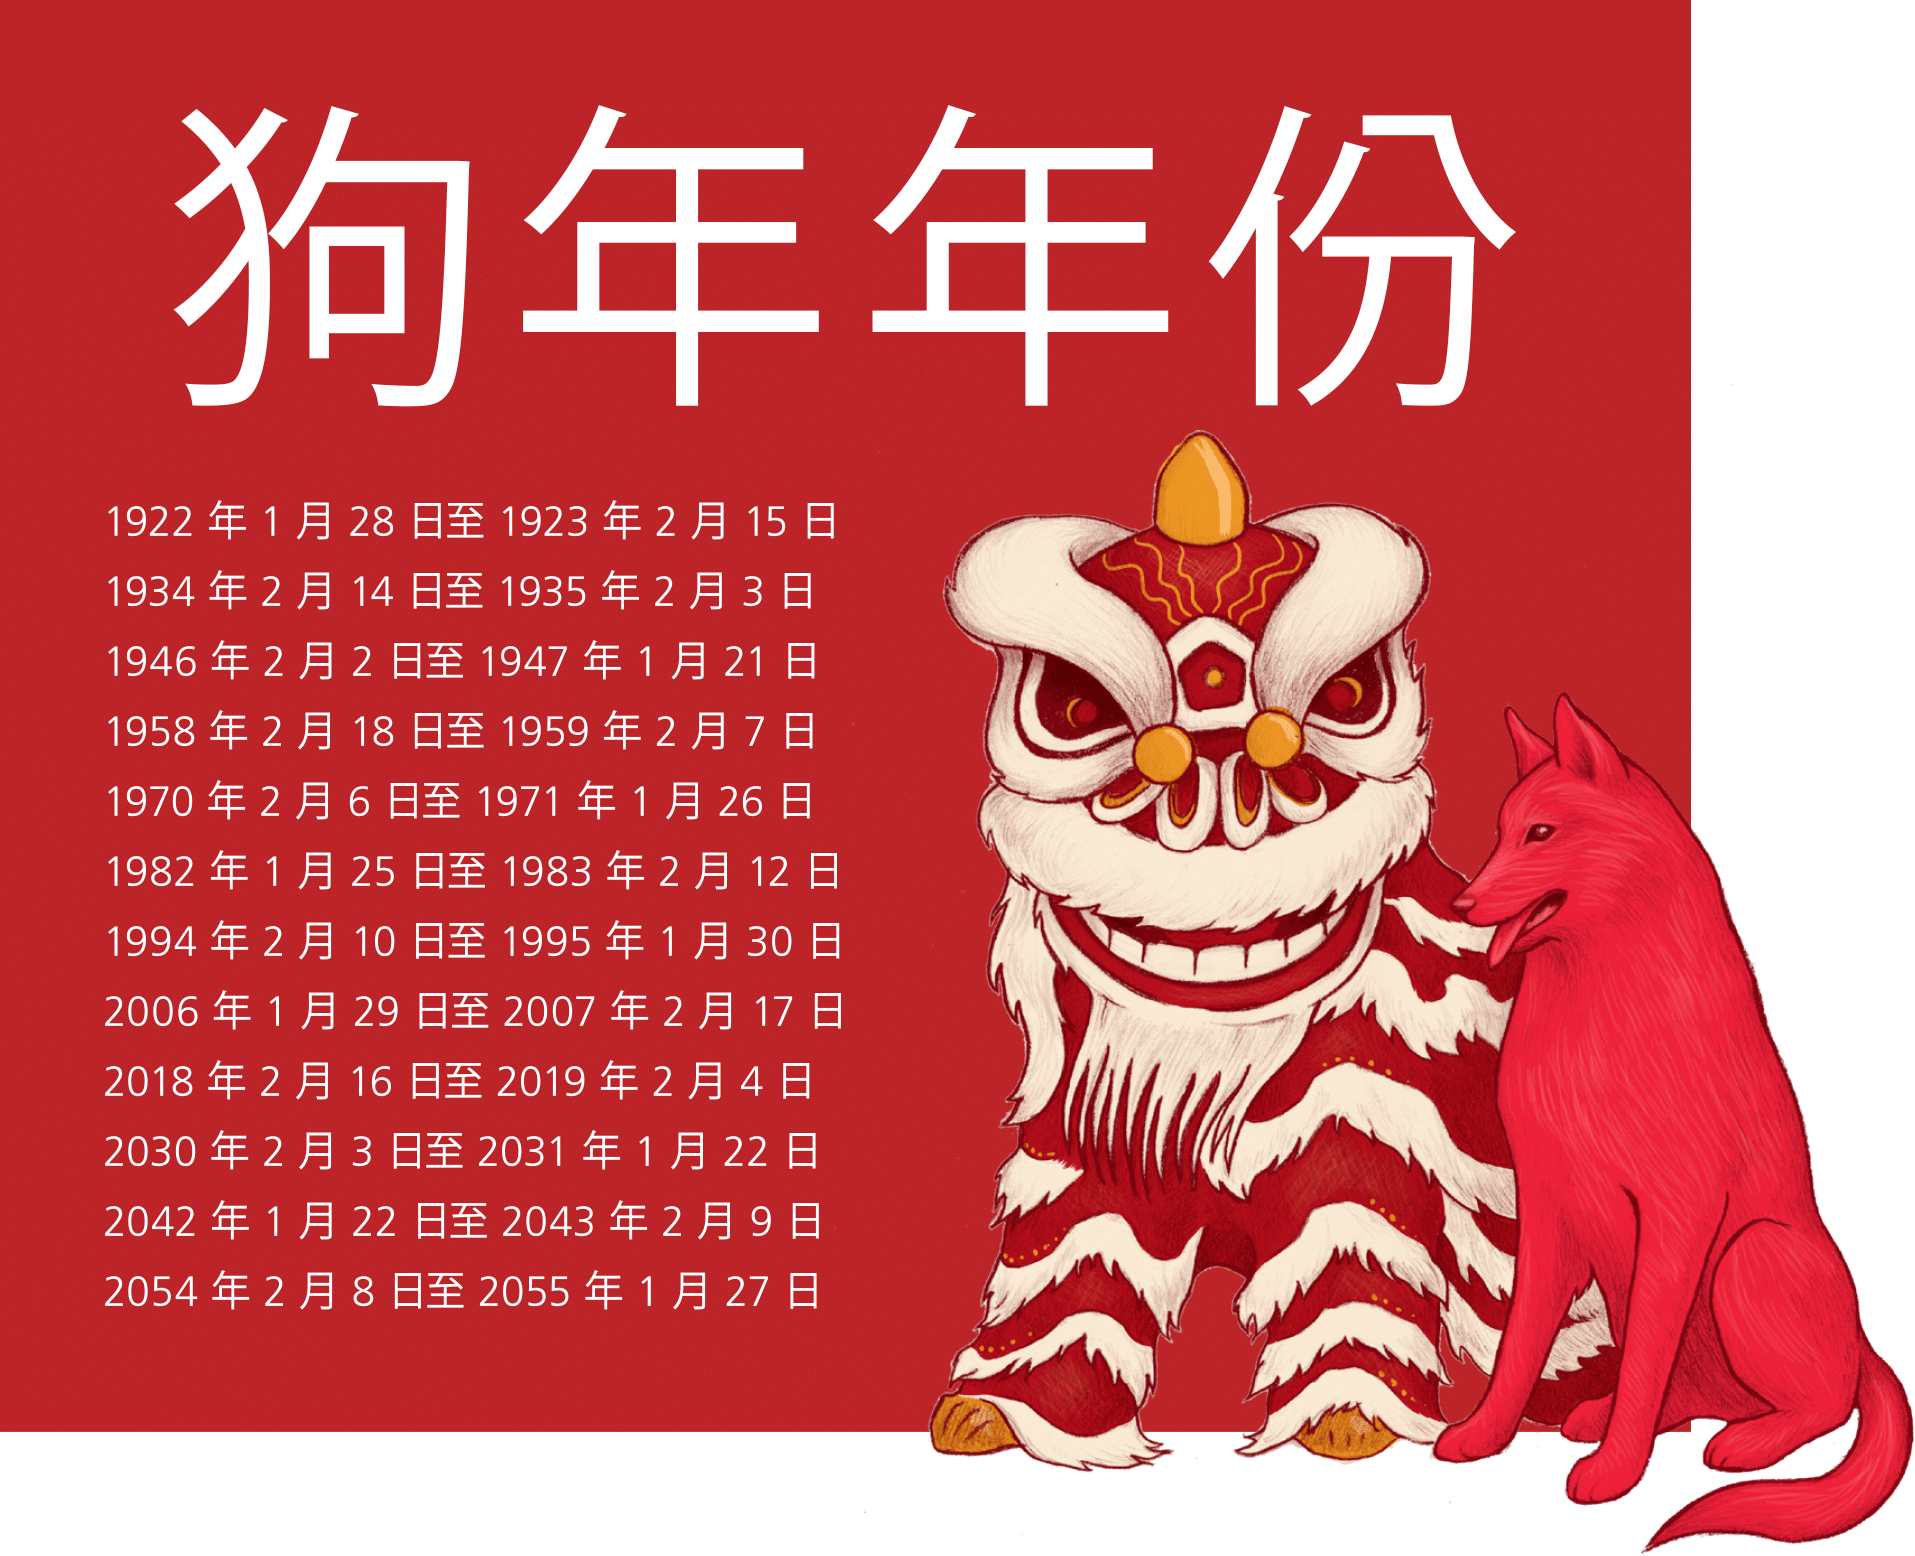 A New Year, A New You — Gung Hay Fat Choy! (Traditional Chinese)